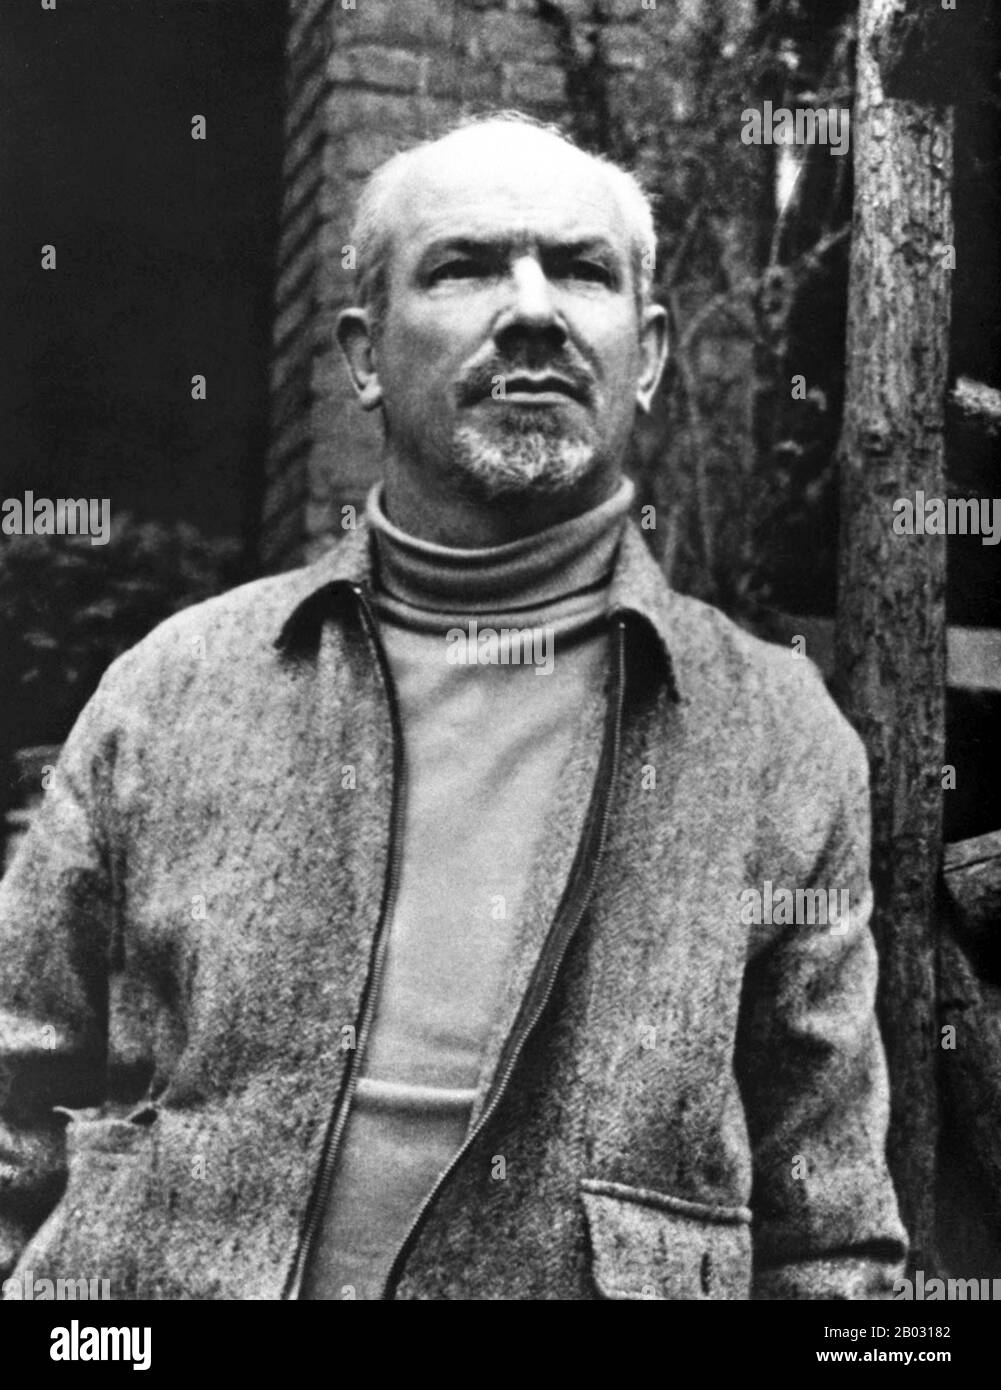 Henry Norman Bethune (March 4, 1890 – November 12, 1939; Chinese:  Bai Qiuen) was a Canadian physician, medical innovator, and noted anti-fascist.  Bethune came to international prominence first for his service as a frontline surgeon supporting the democratically-elected Republican government during the Spanish Civil War. But it was his service with the Communist Eighth Route Army (Ba Lu Jun) during the Second Sino-Japanese War that would earn him enduring acclaim.  Dr Bethune effectively brought modern medicine to rural China and often treated sick villagers as much as wounded soldiers. His s Stock Photo